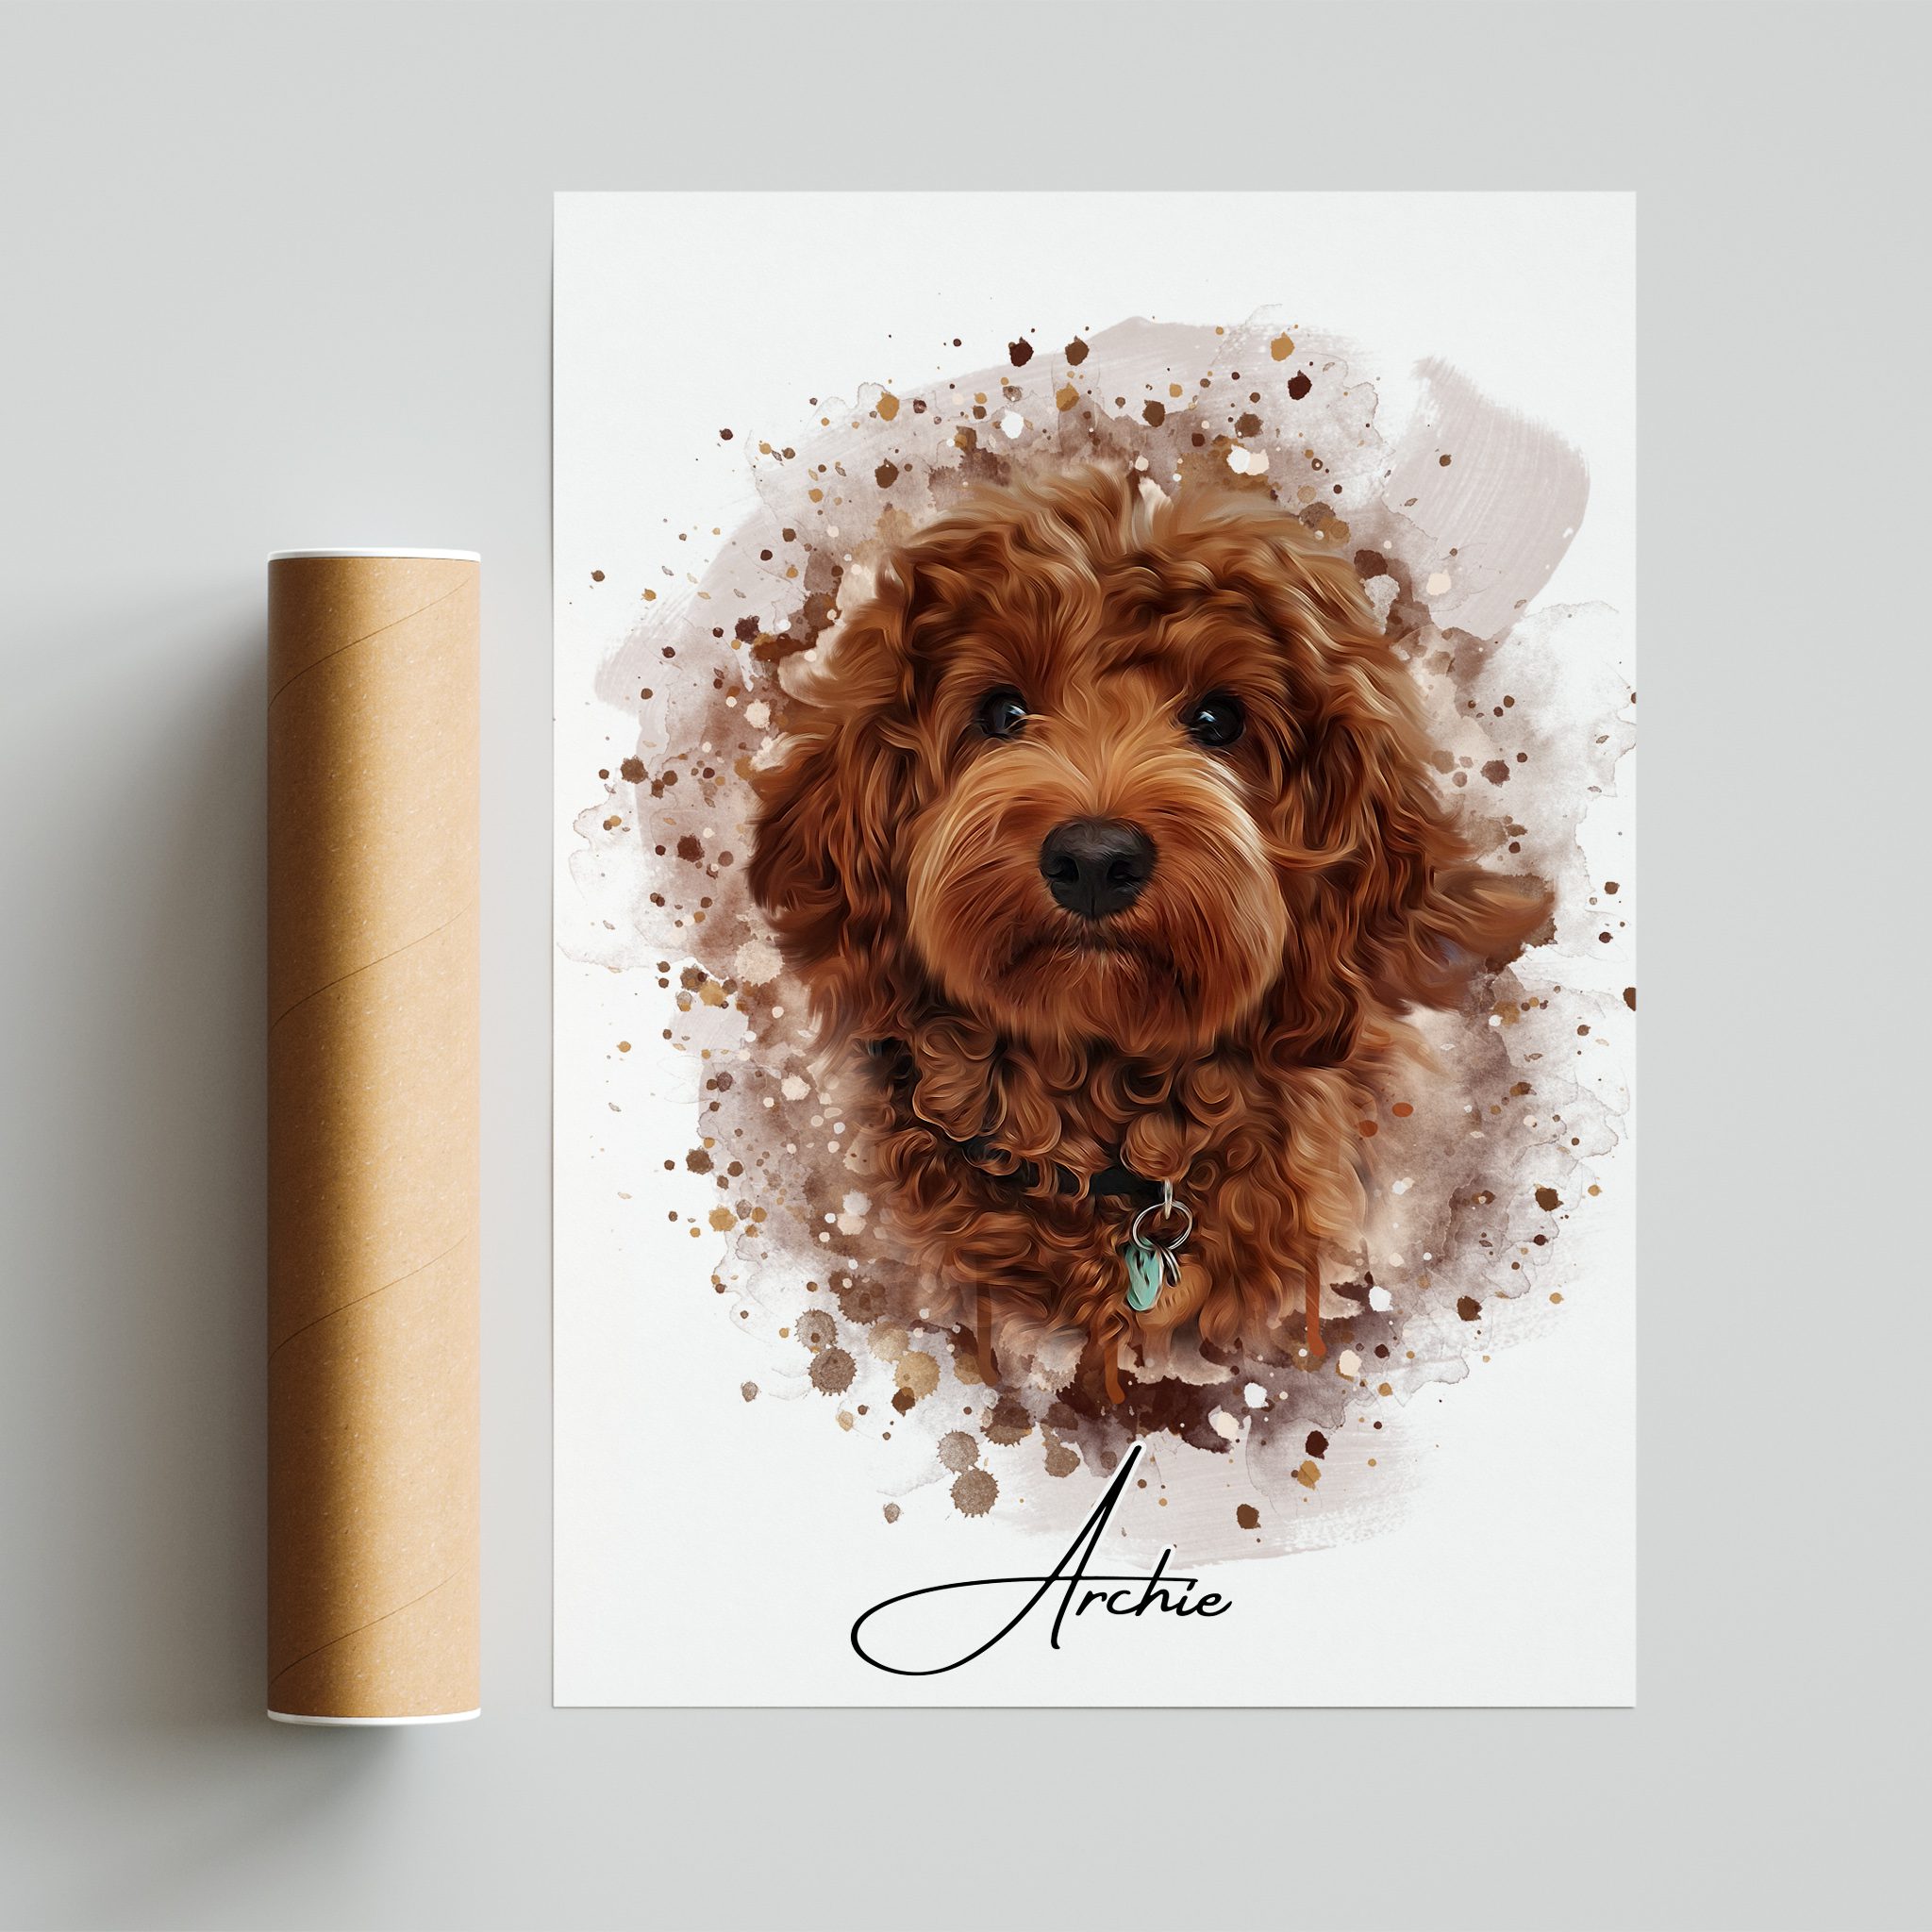 Your pet drawn as a watercolour image and printed as a poster print